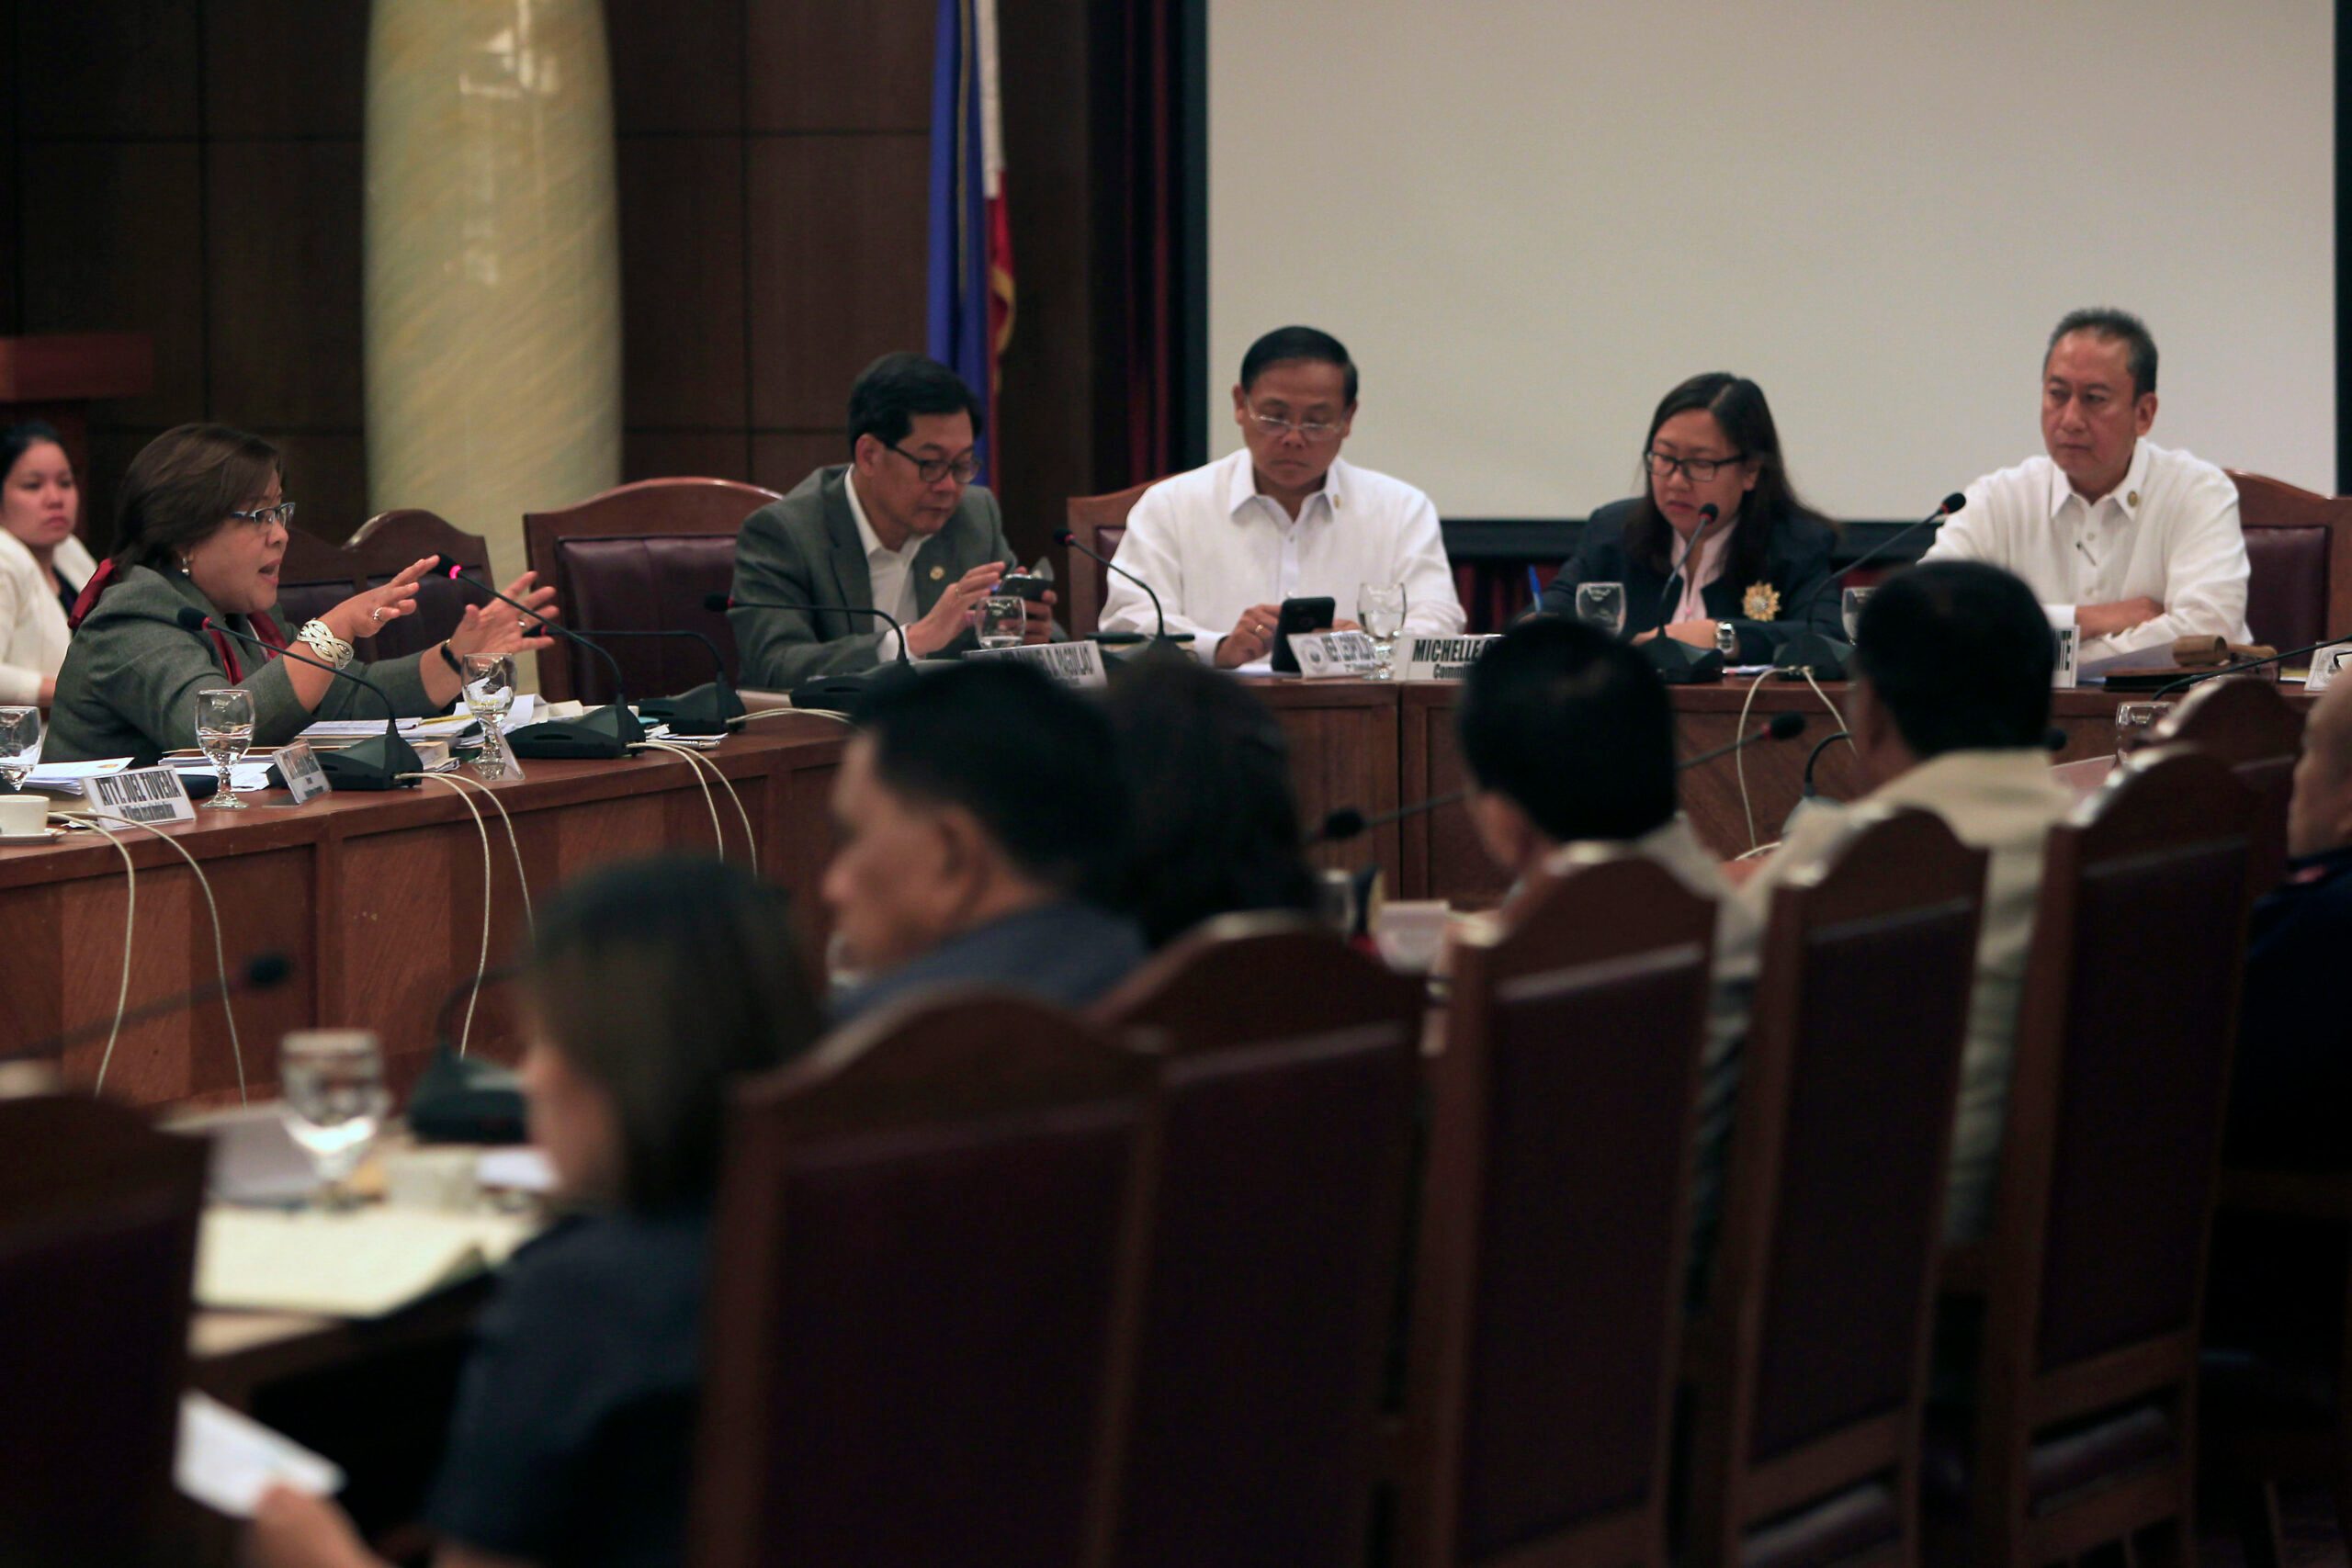 DOJ suggests wiretapping to fight drug syndicates